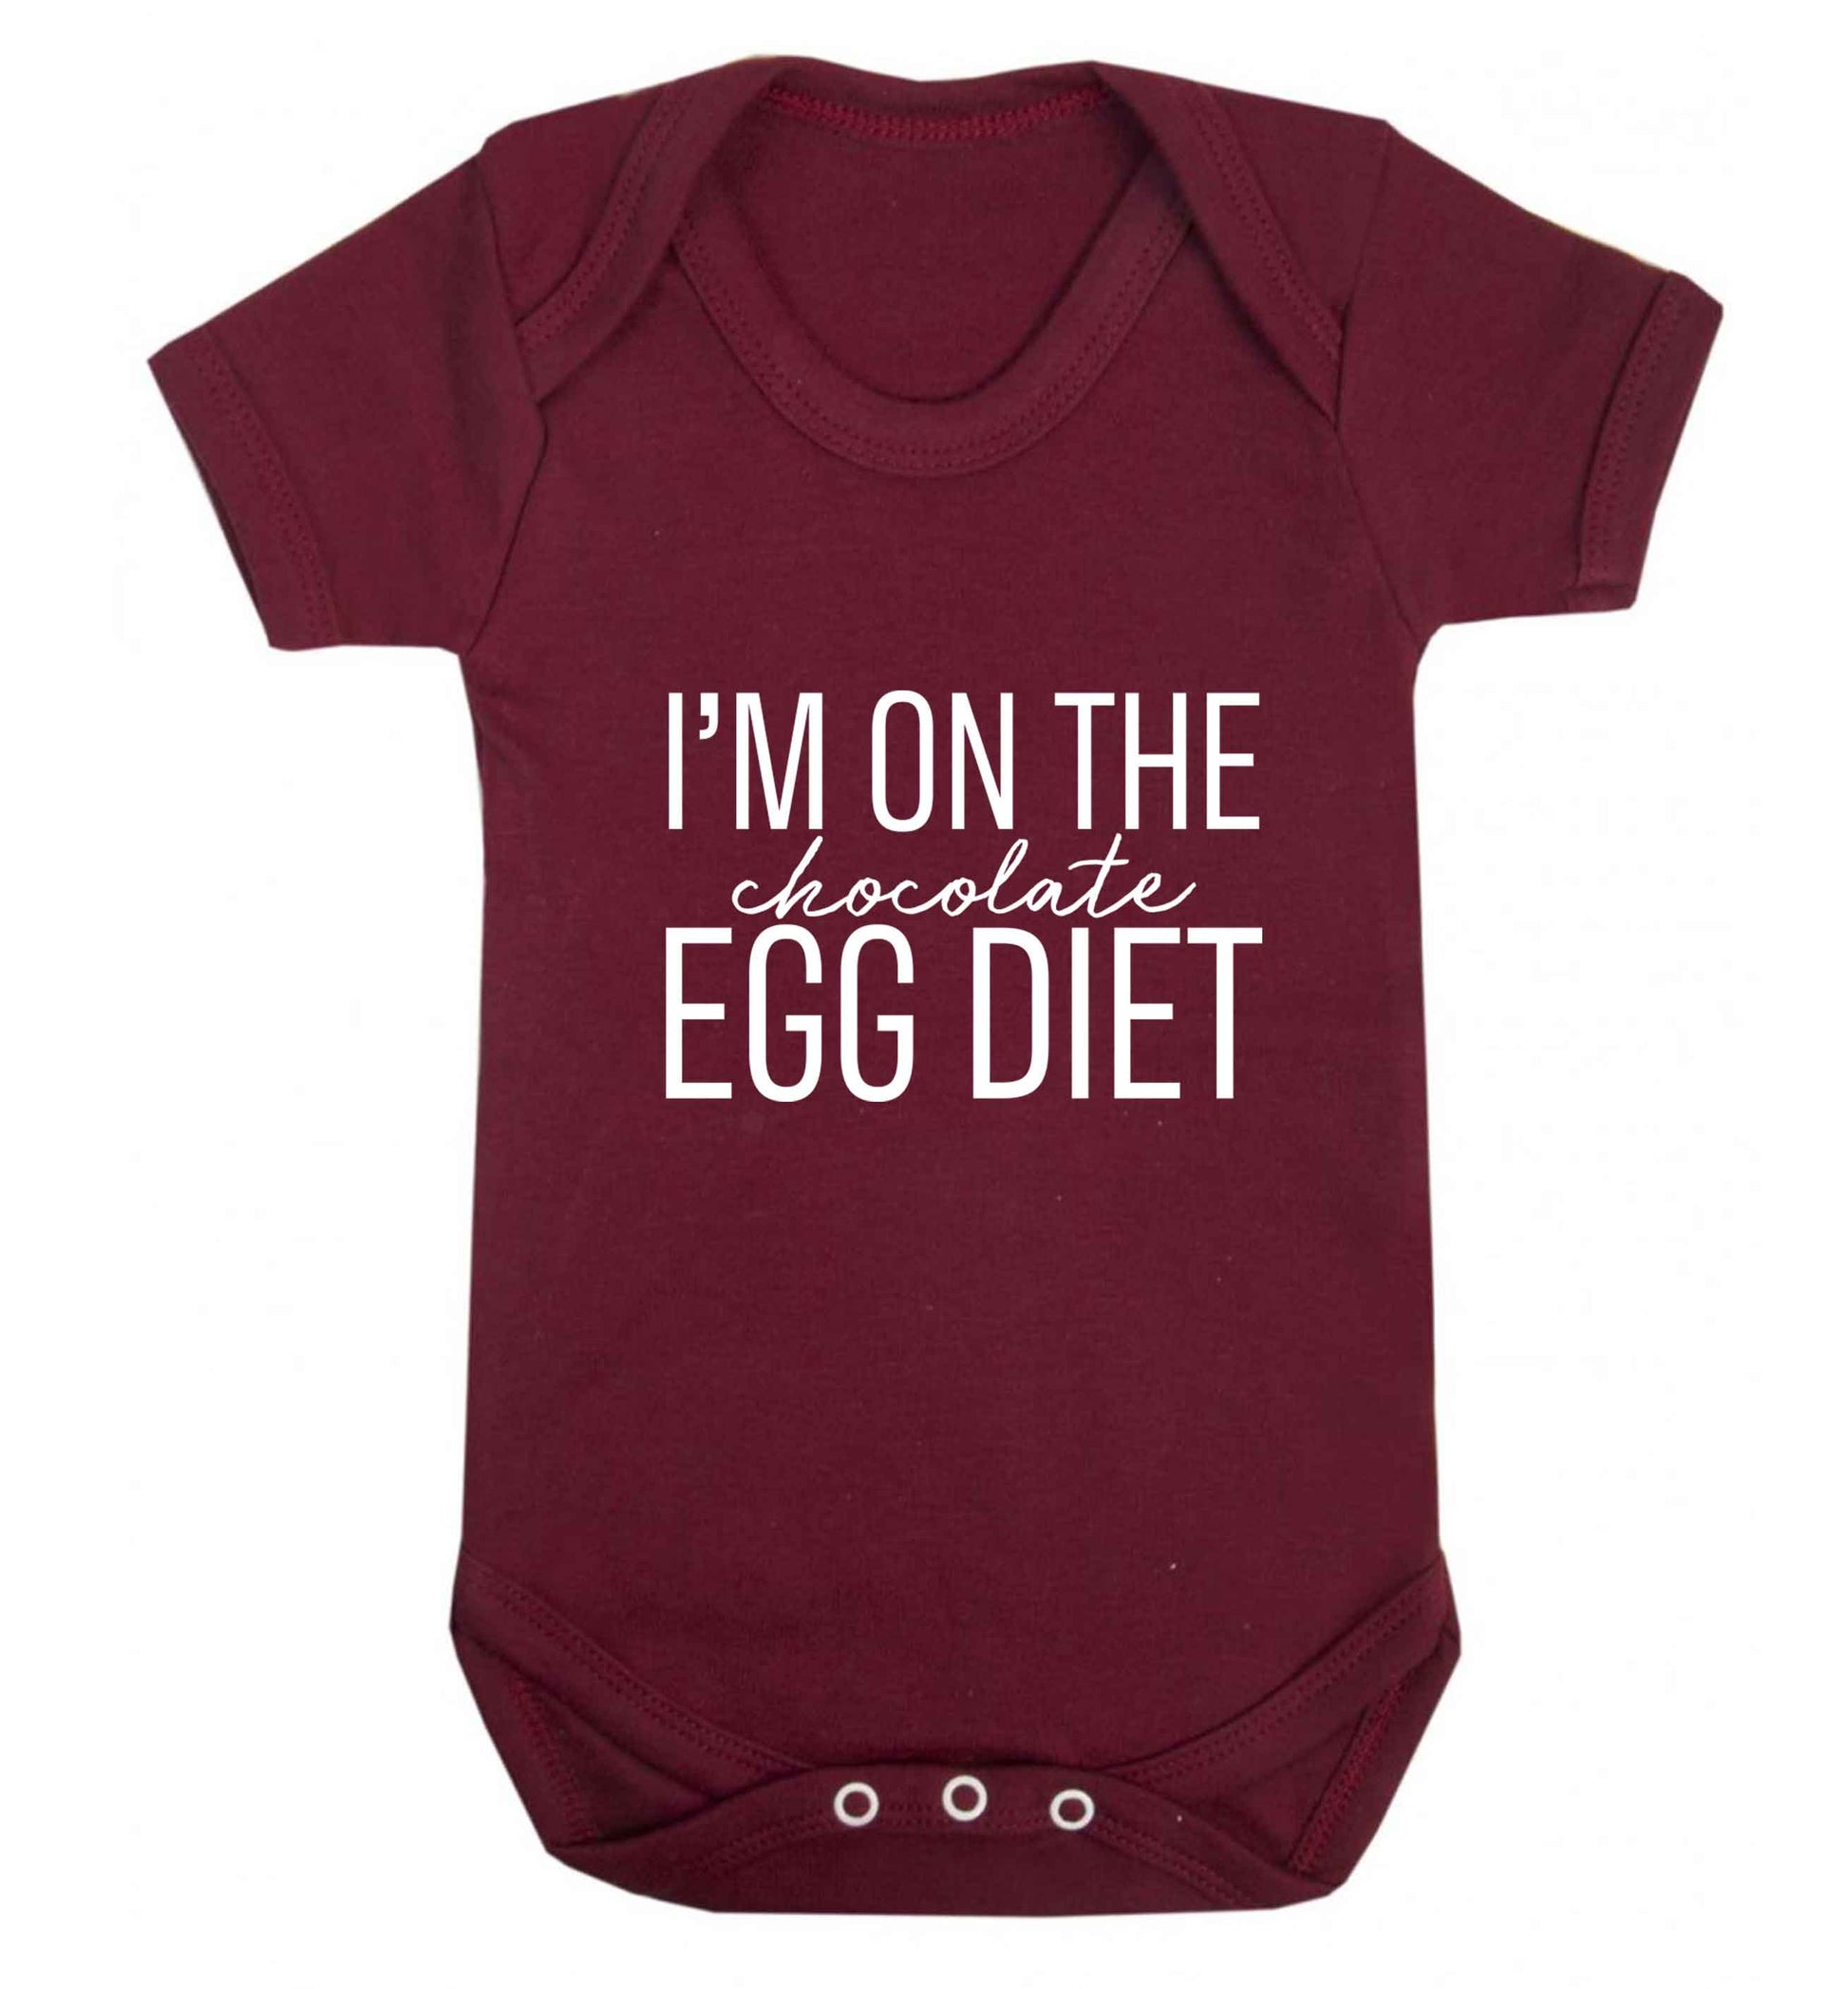 I'm on the chocolate egg diet baby vest maroon 18-24 months